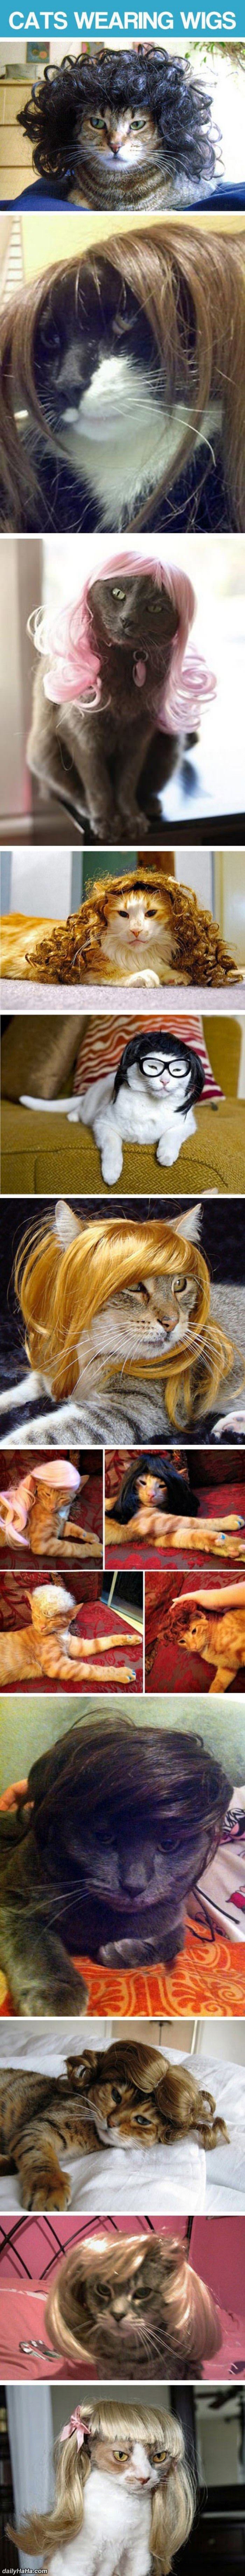 cats wearing wigs funny picture